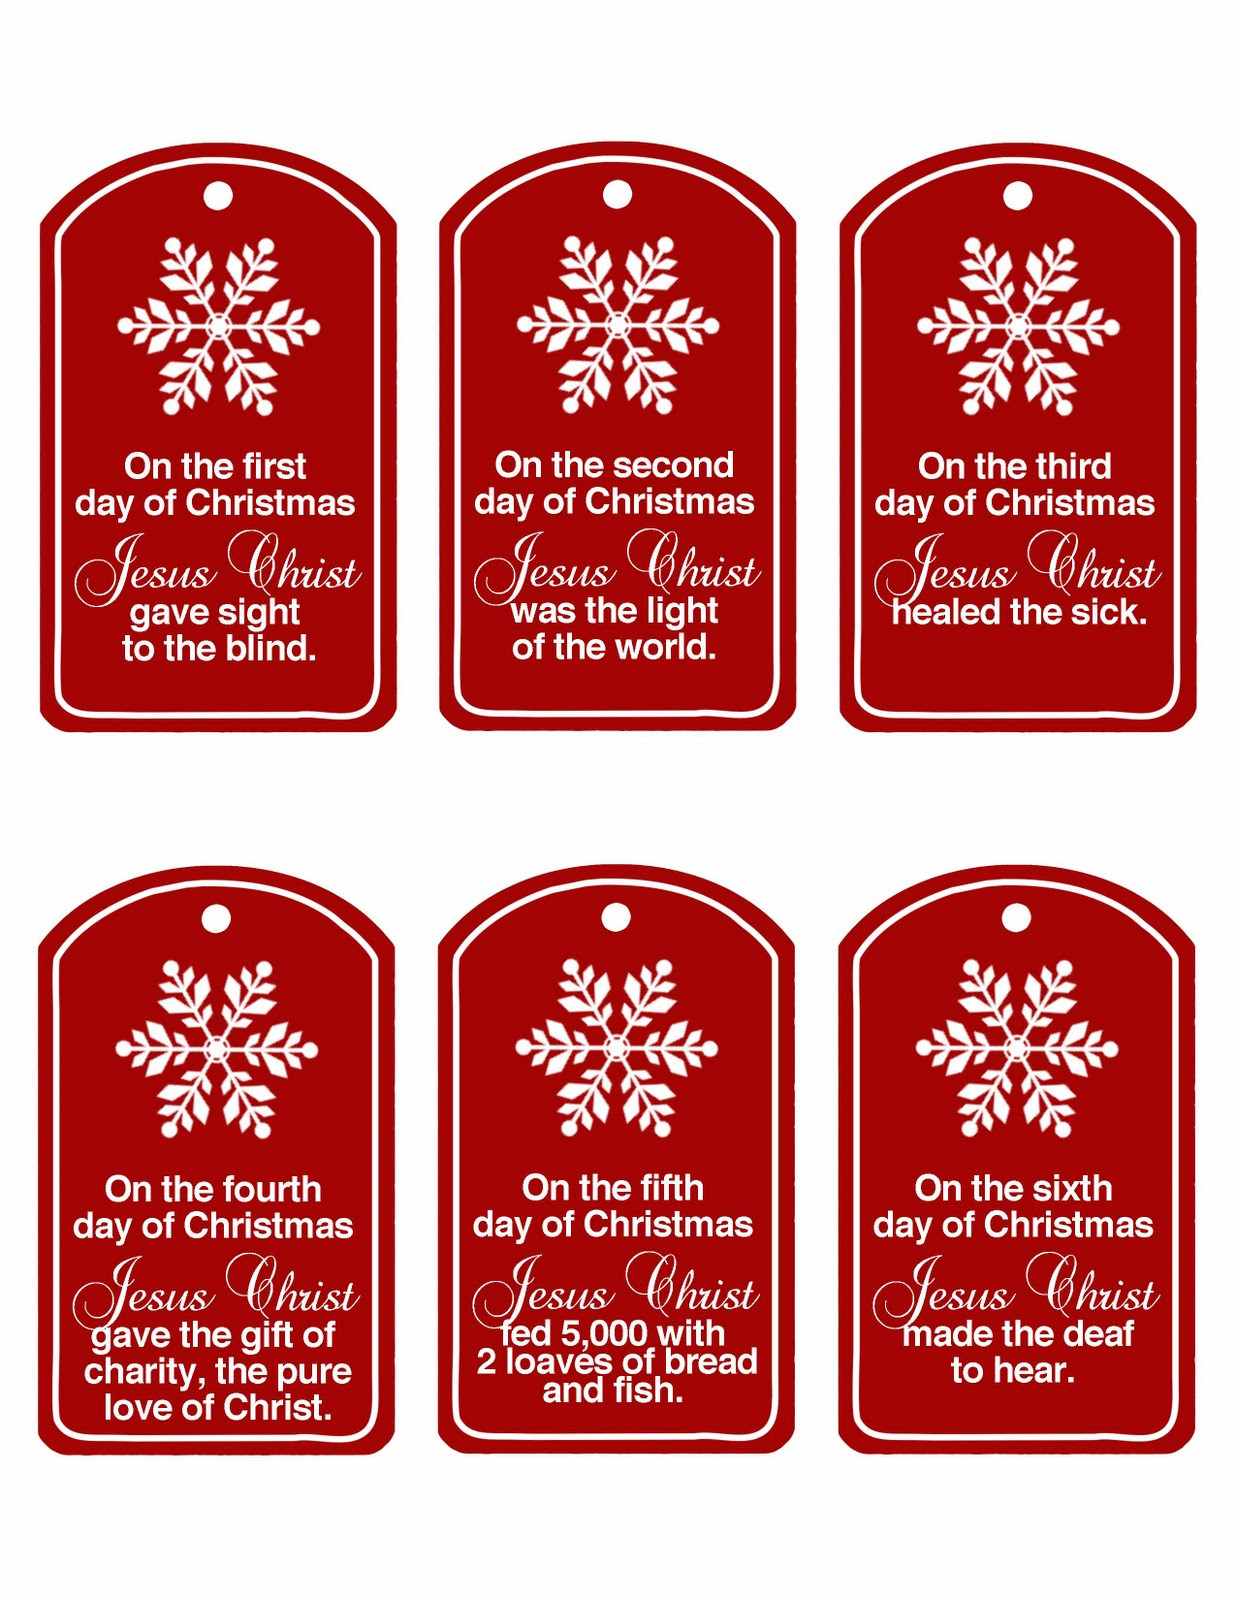 12 Days Of Christmas Funny Gift Ideas
 Family Home Fun Christ Centered 12 Days of Christmas